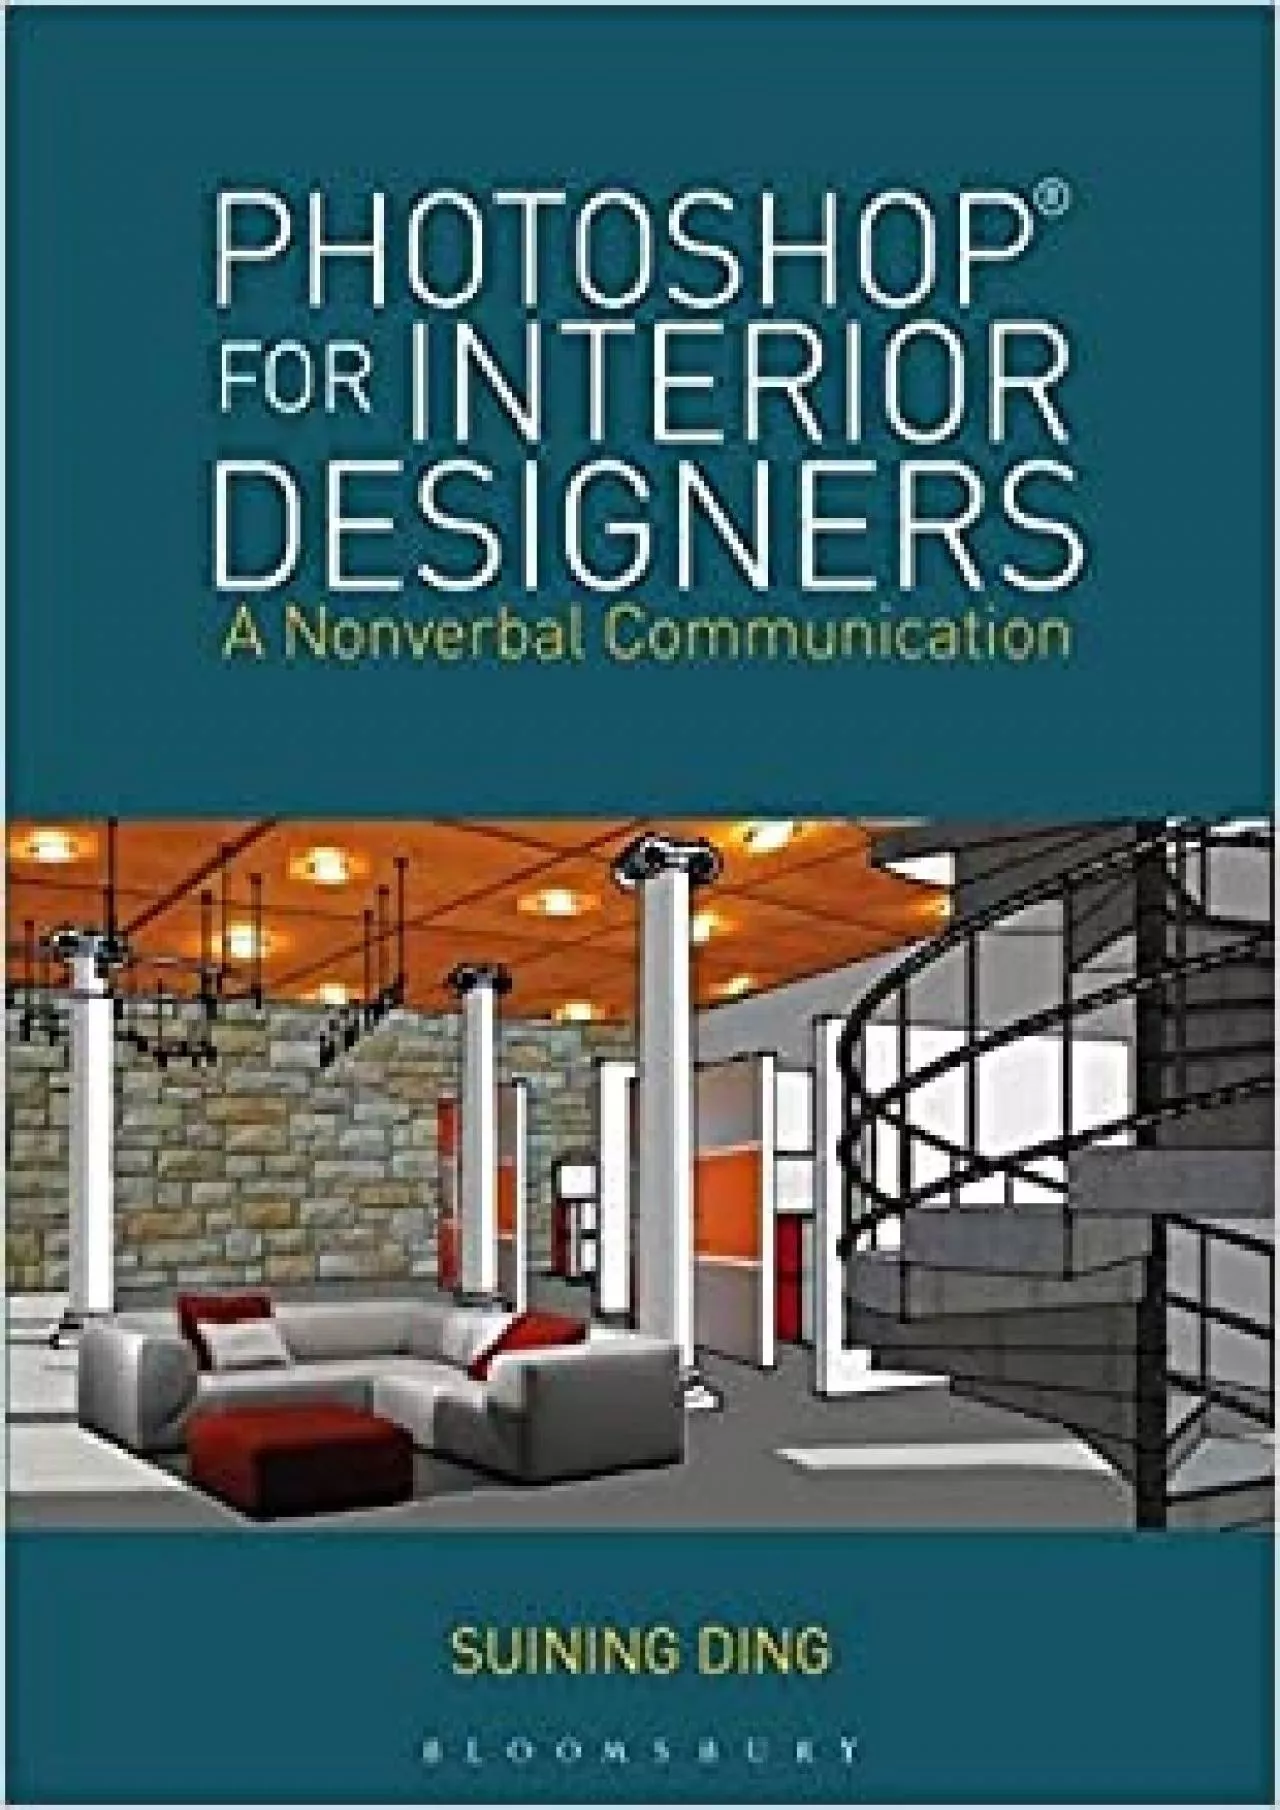 Photoshop® for Interior Designers: A Nonverbal Communication